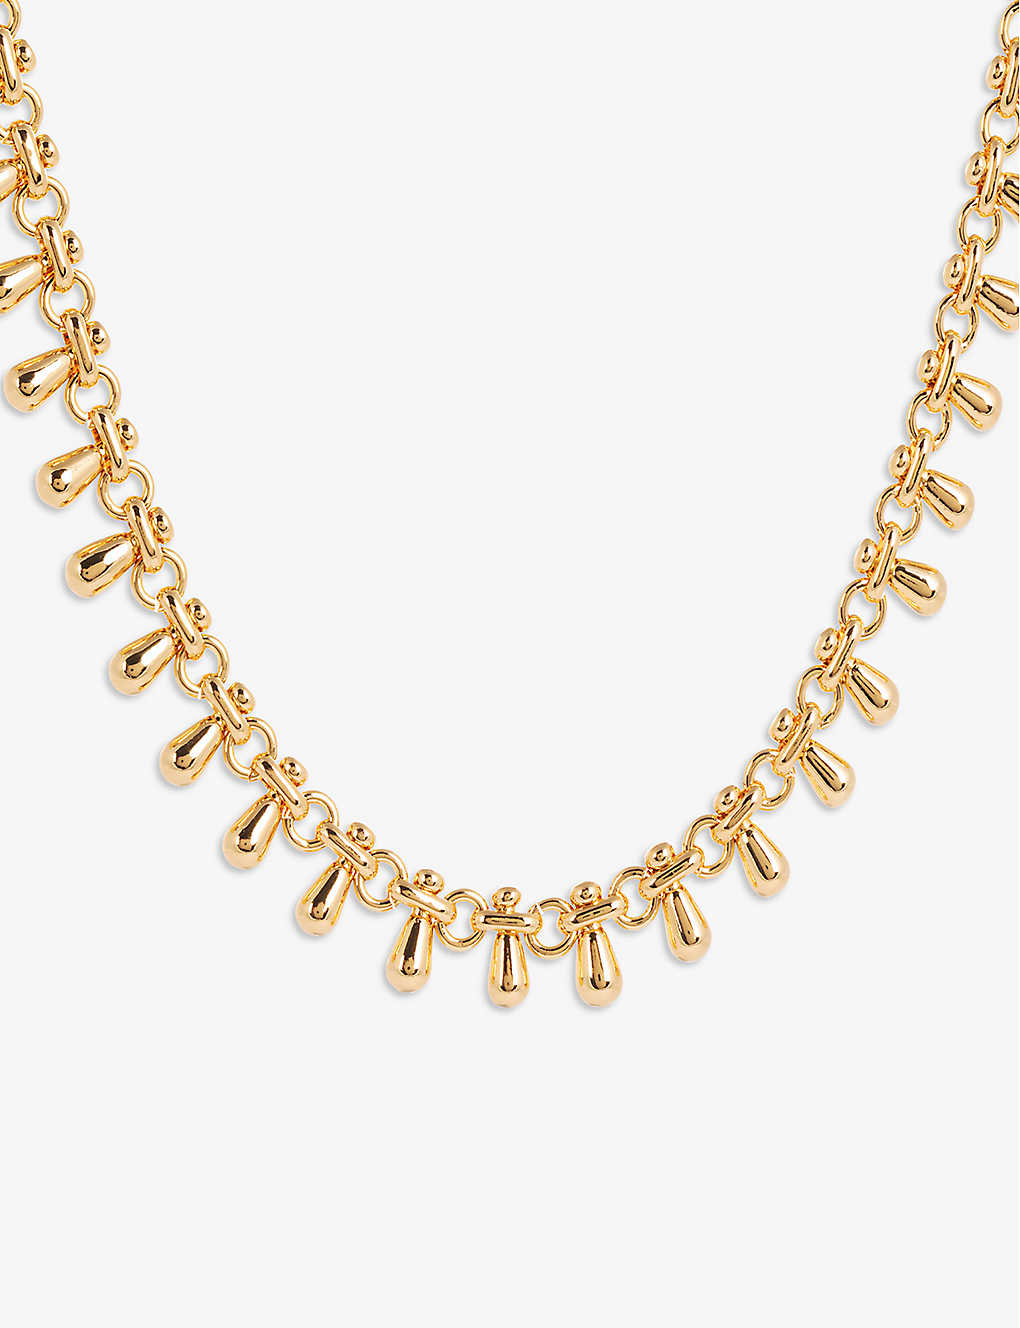 La Maison Couture Amadeus Katia 14ct Recycled Yellow Gold-plated Brass Necklace